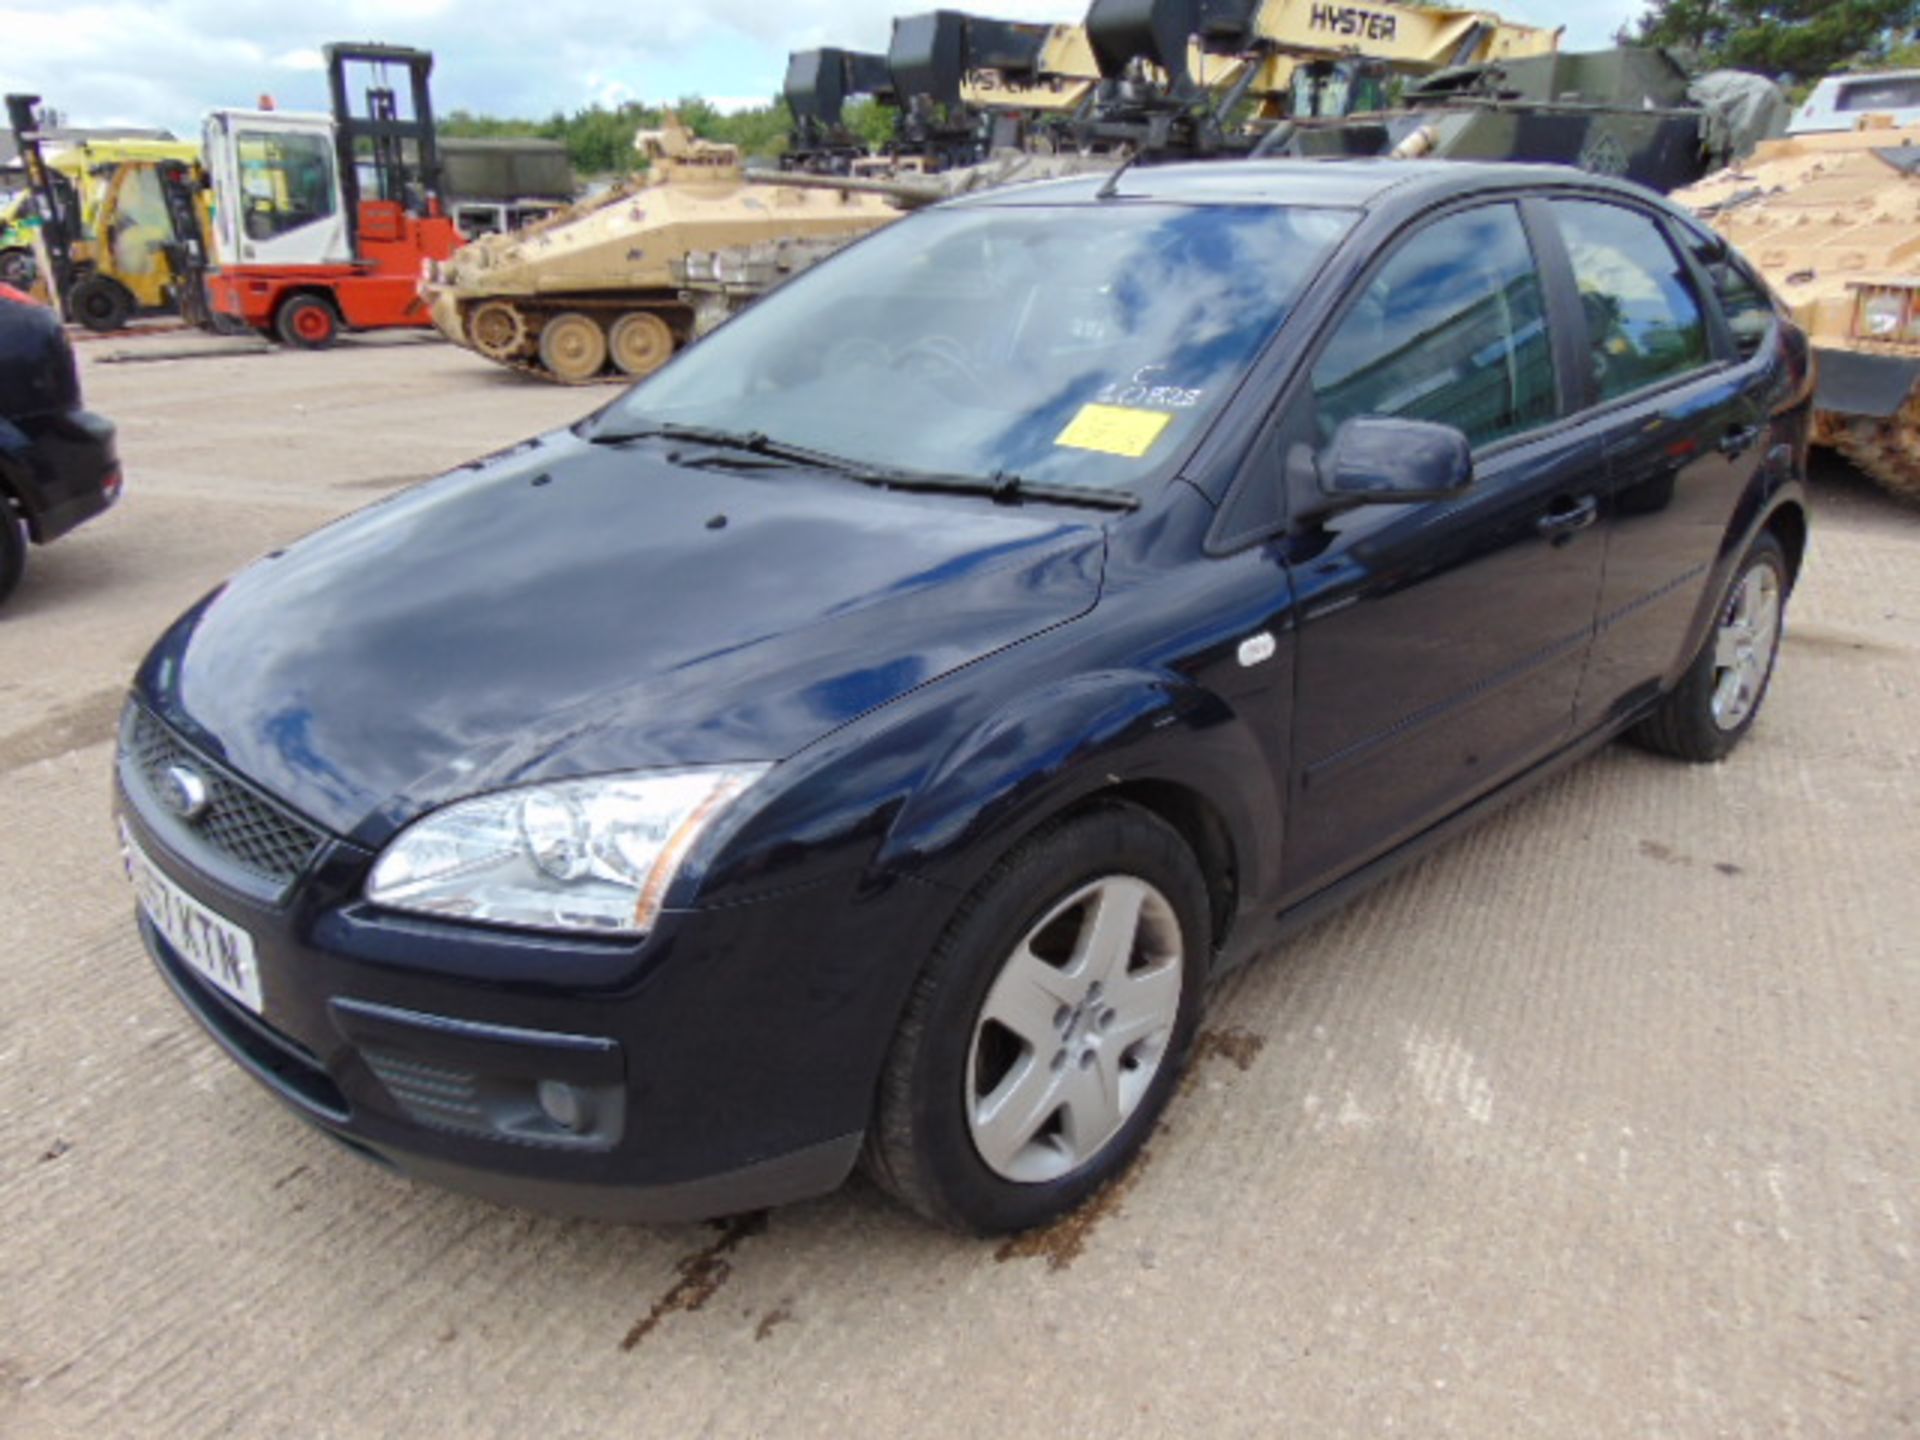 2008 Ford Focus 1.8 TDCI Style Hatchback - Image 3 of 17